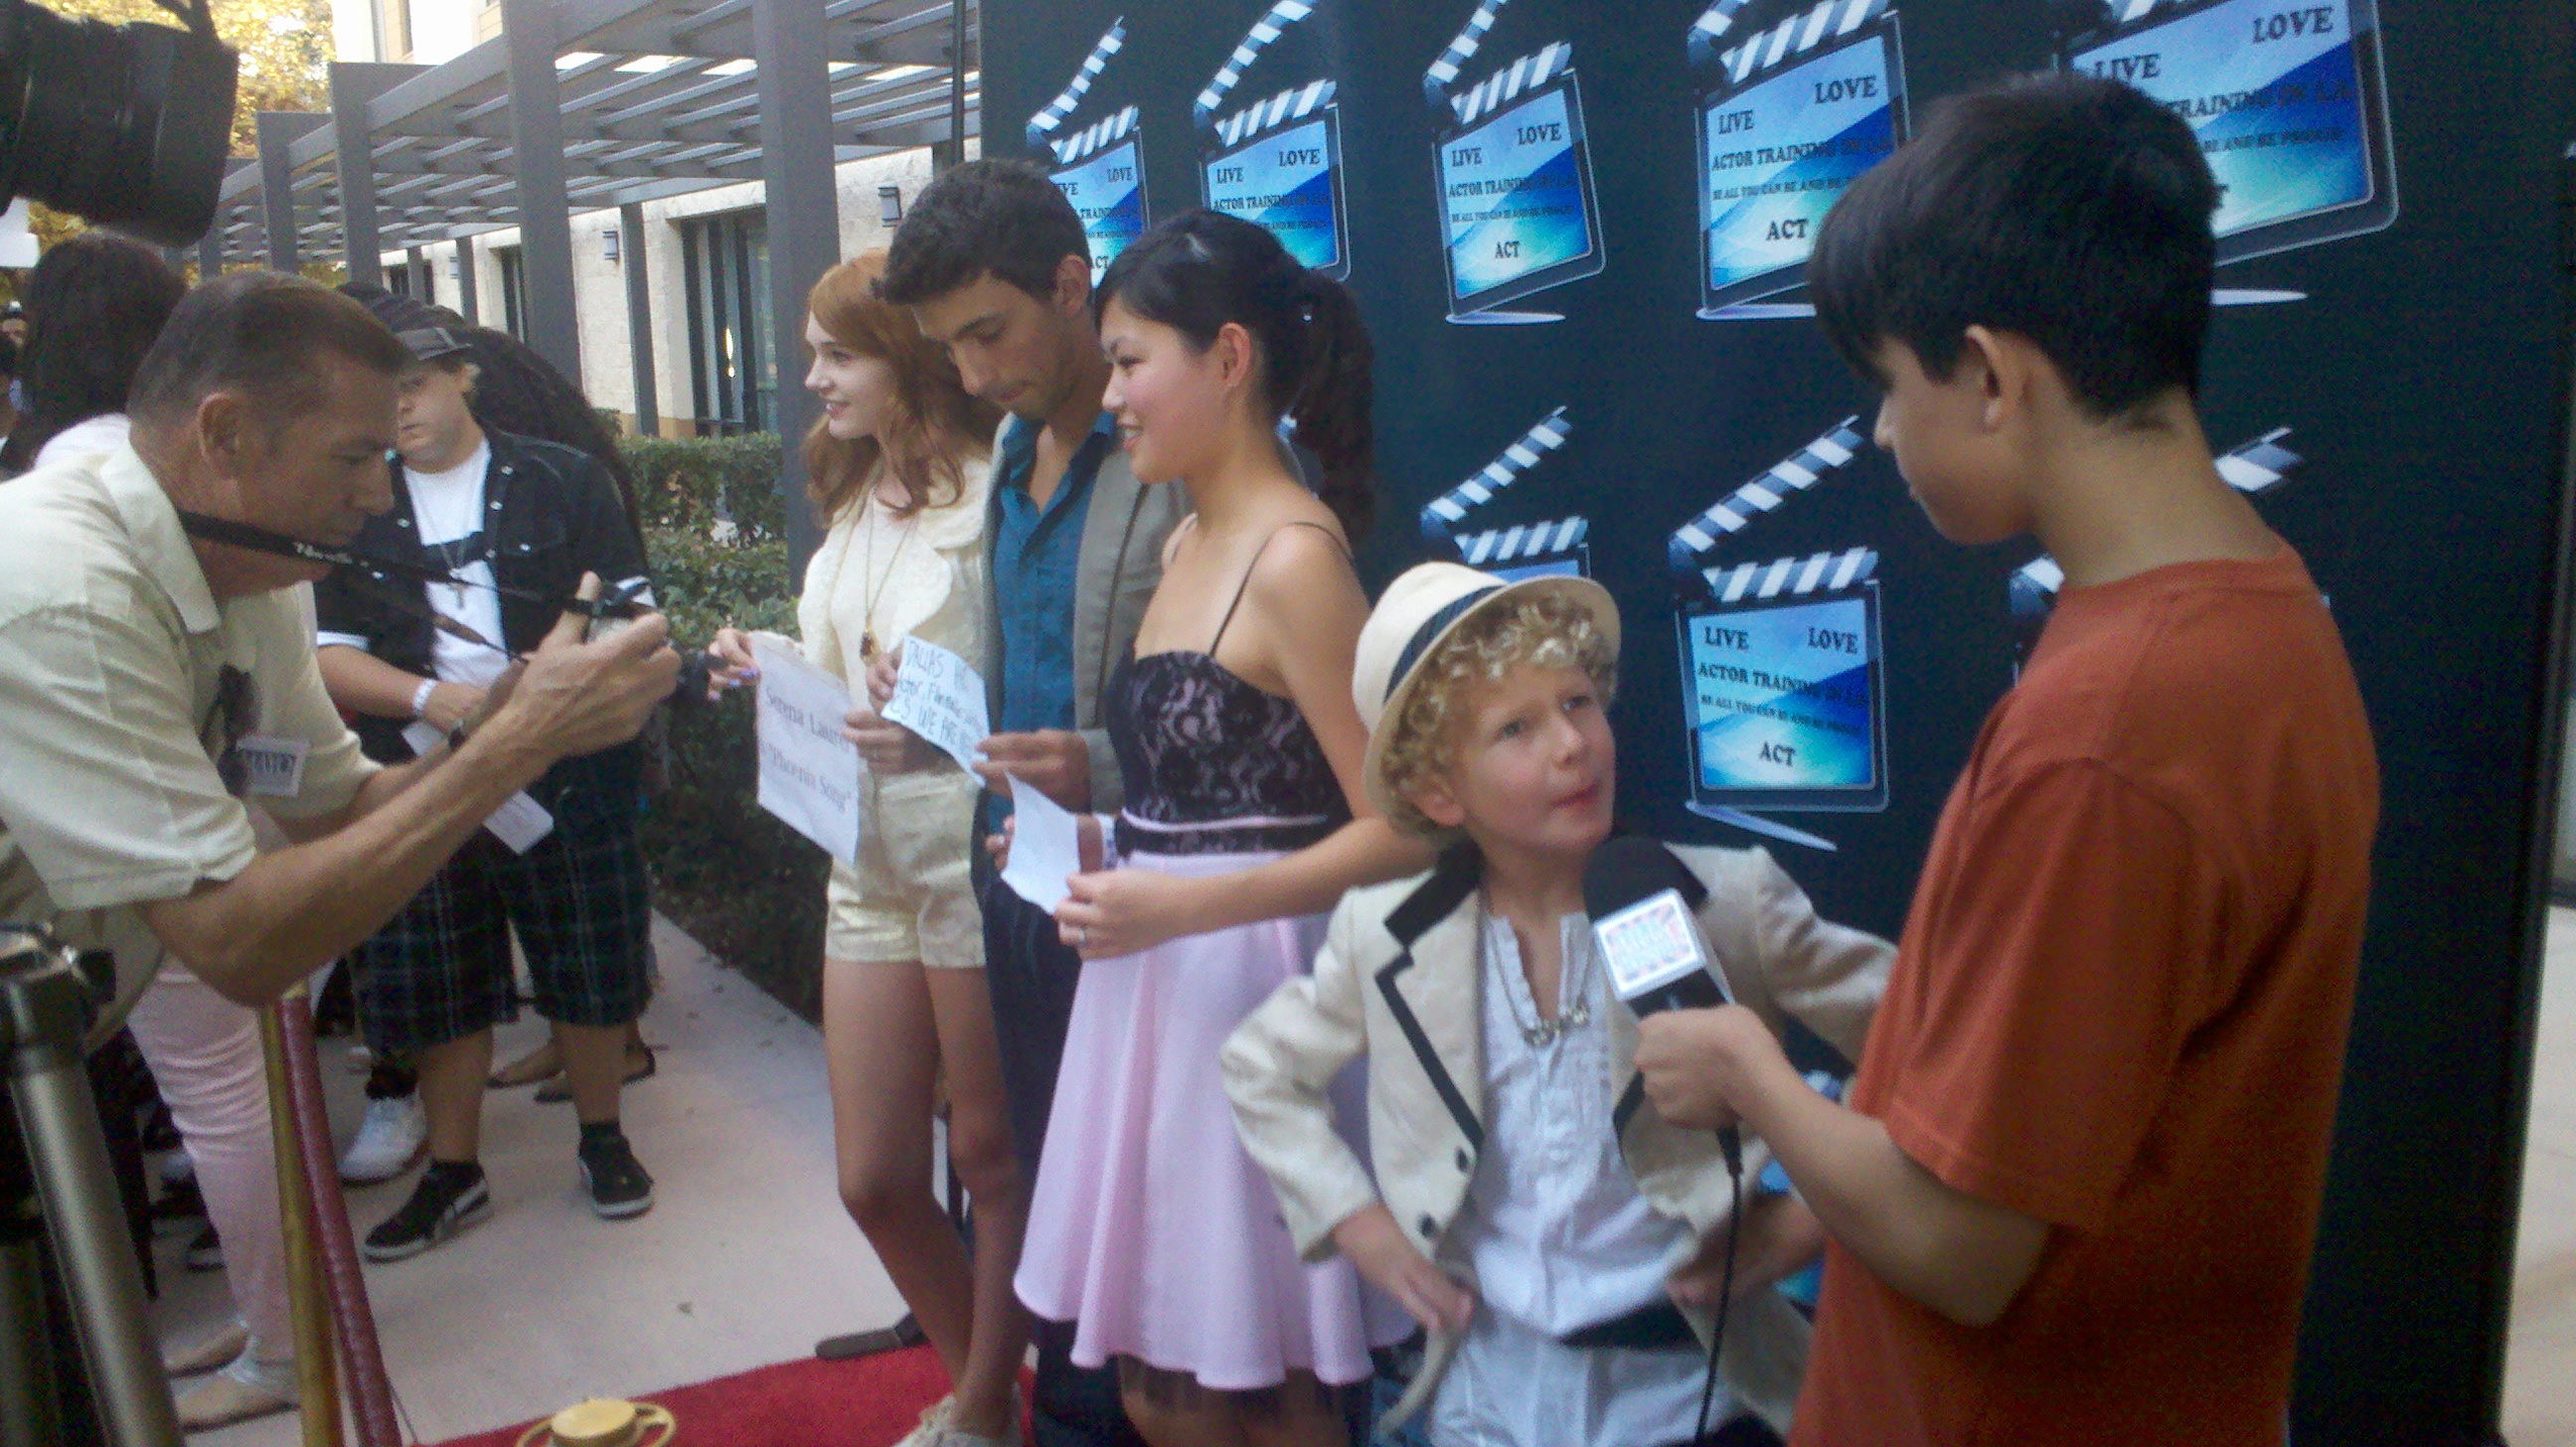 Marcus interviewing at Actor Training in LA Red Carpet Event.